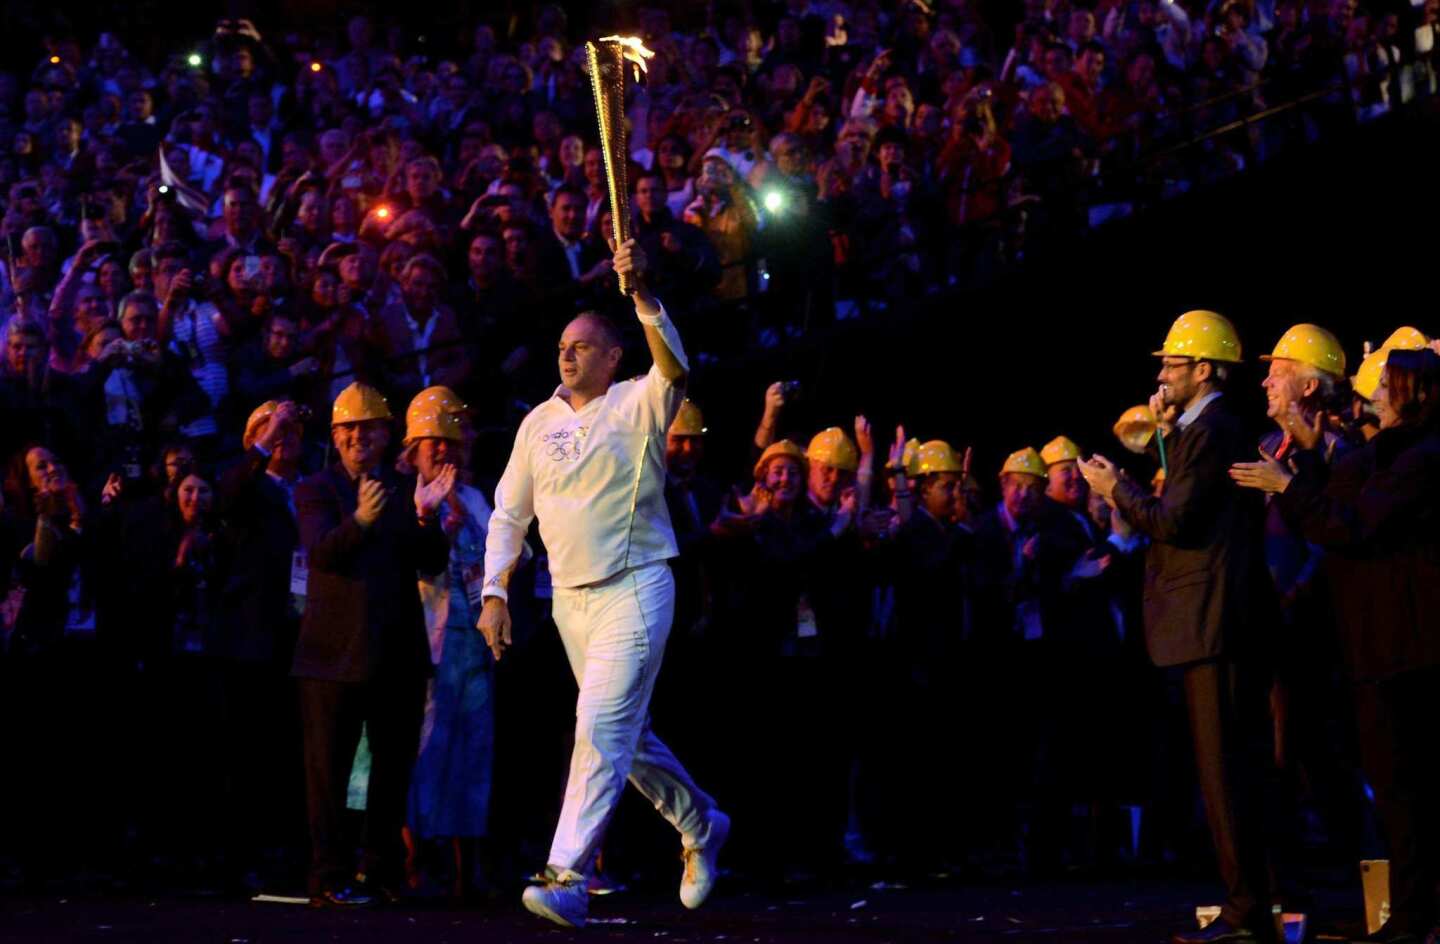 Sir Steve Redgrave, a former British rower who won five Olympic gold medals from 1984 to 2000, carries the torch into London's Olympic Stadium during the opening ceremony on Friday.